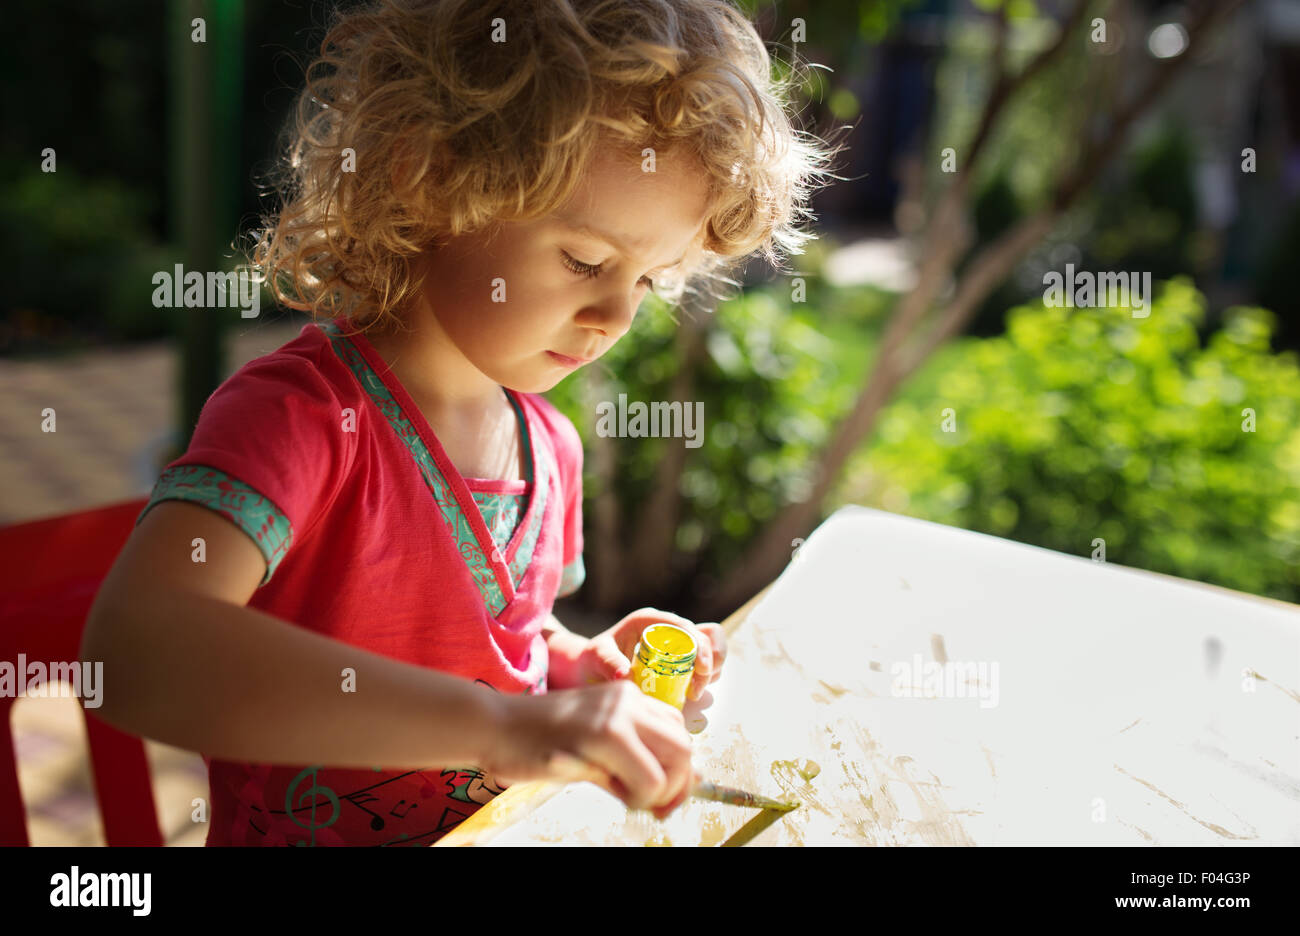 Portrait of little girl painting, summer outdoor Stock Photo